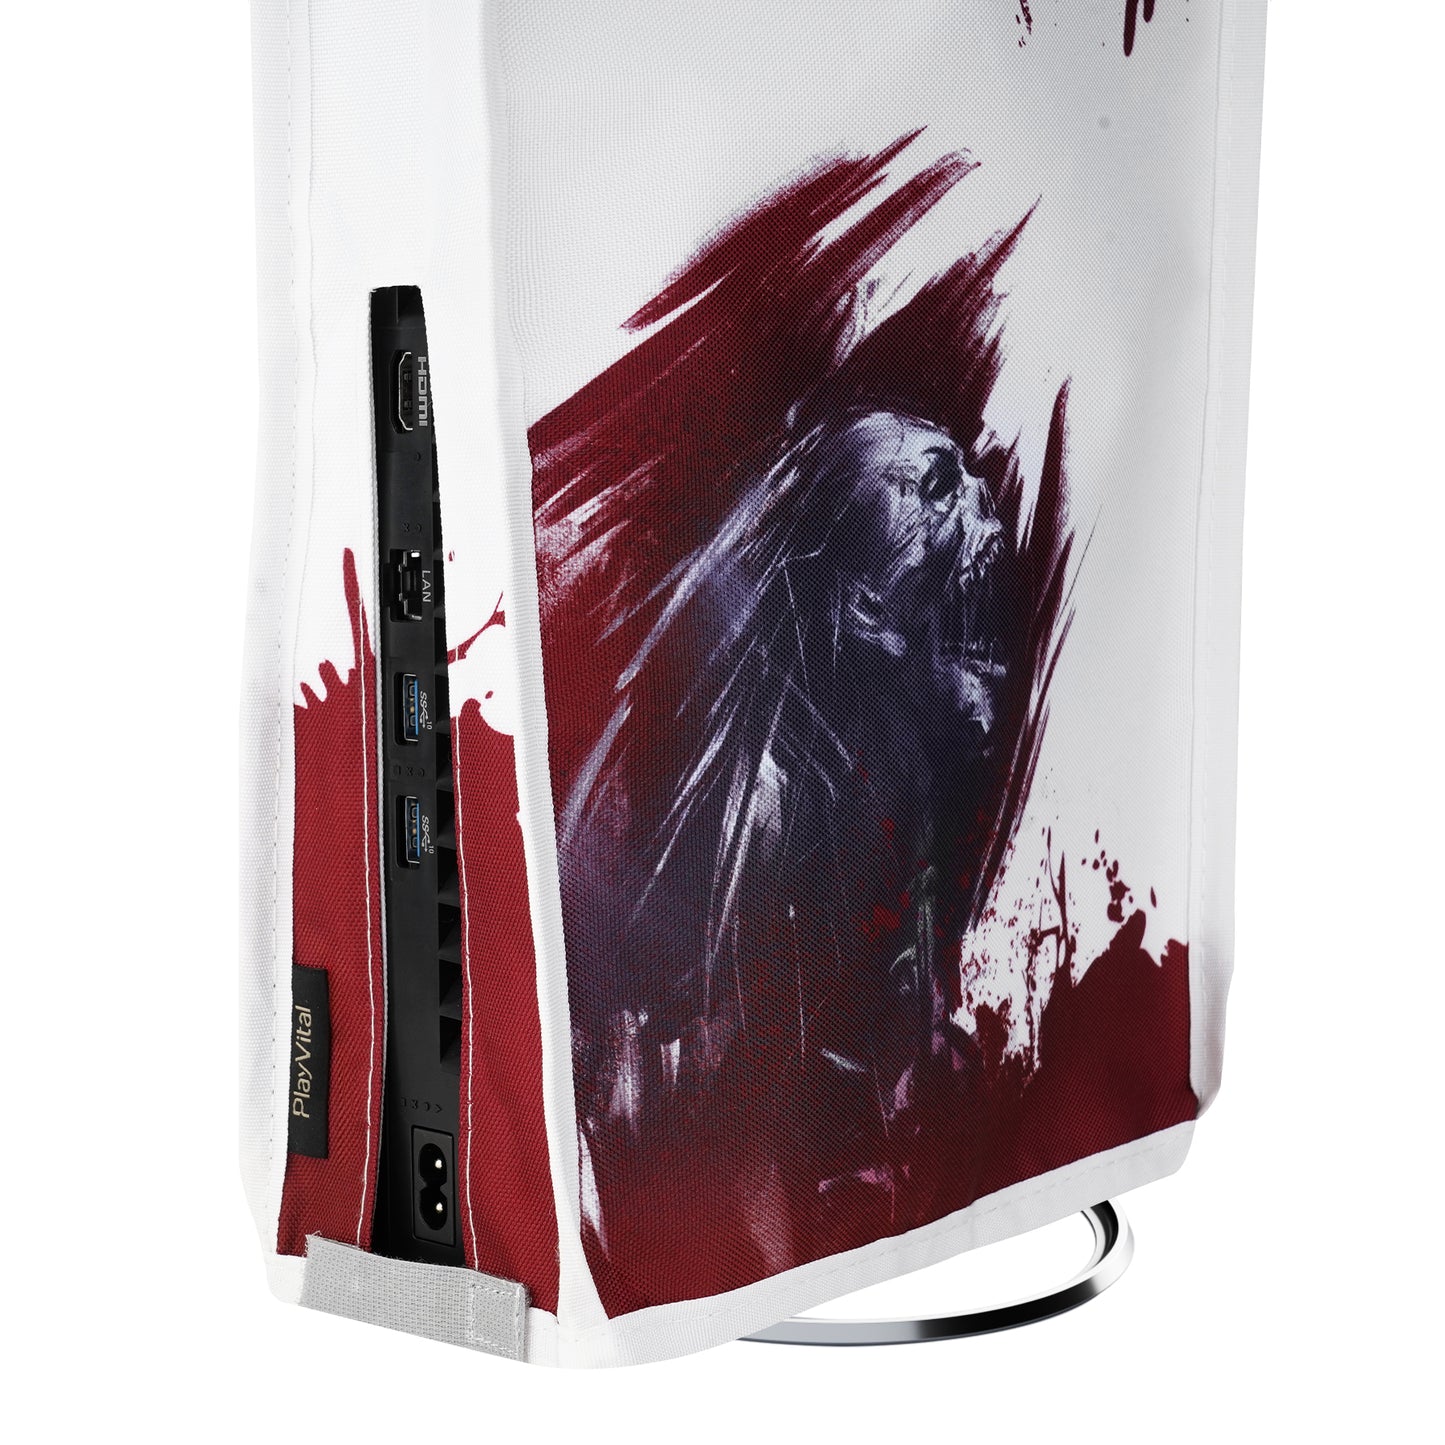 PlayVital Vertical Dust Cover for ps5 Slim Disc Edition(The New Smaller Design), Nylon Dust Proof Protector Waterproof Cover Sleeve for ps5 Slim Console - Blood Zombie - BMYPFH008 PlayVital